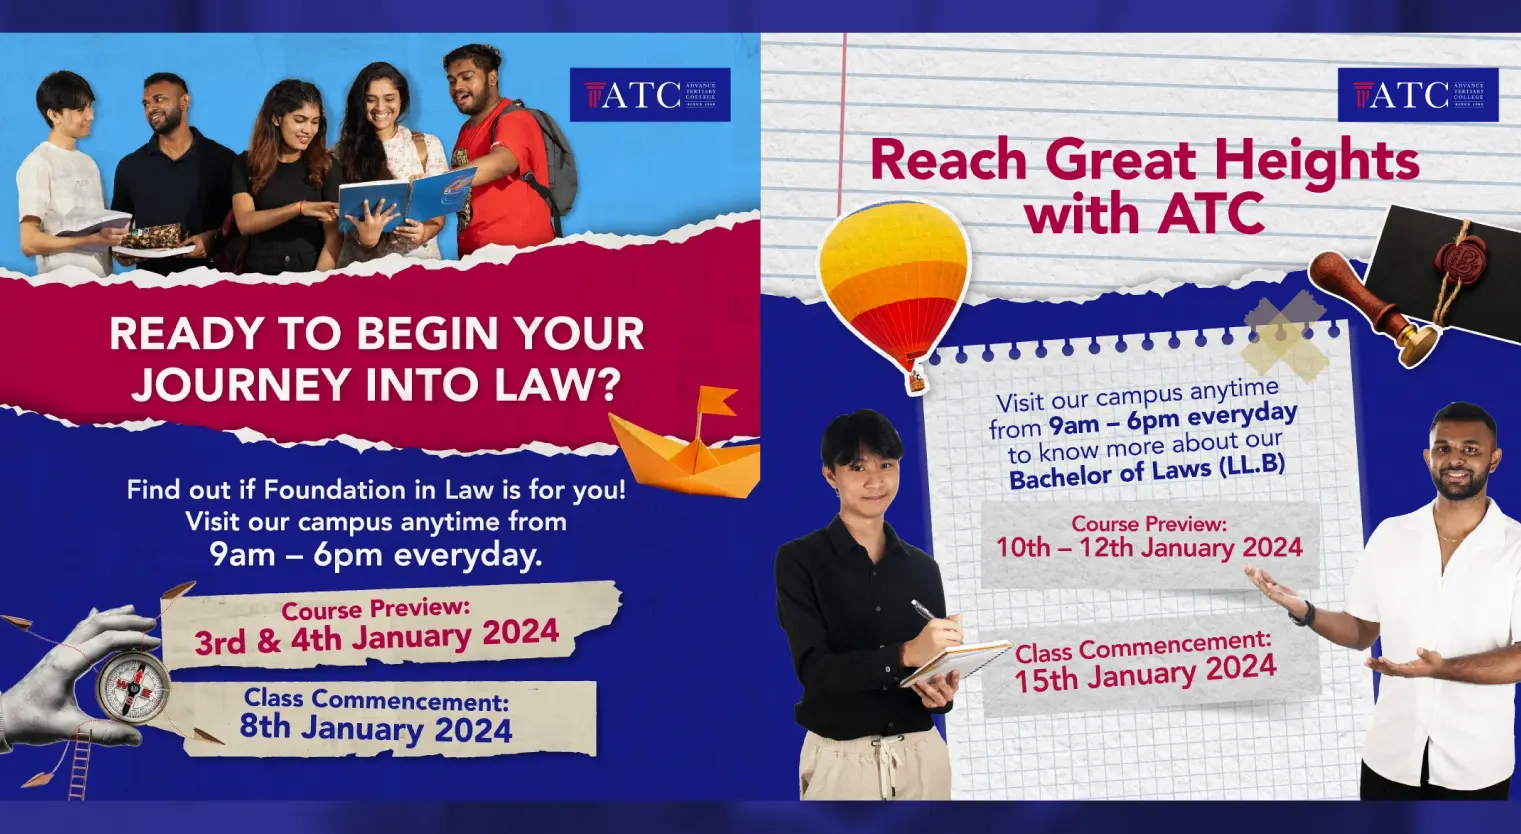 atc-course-preview-january-2024